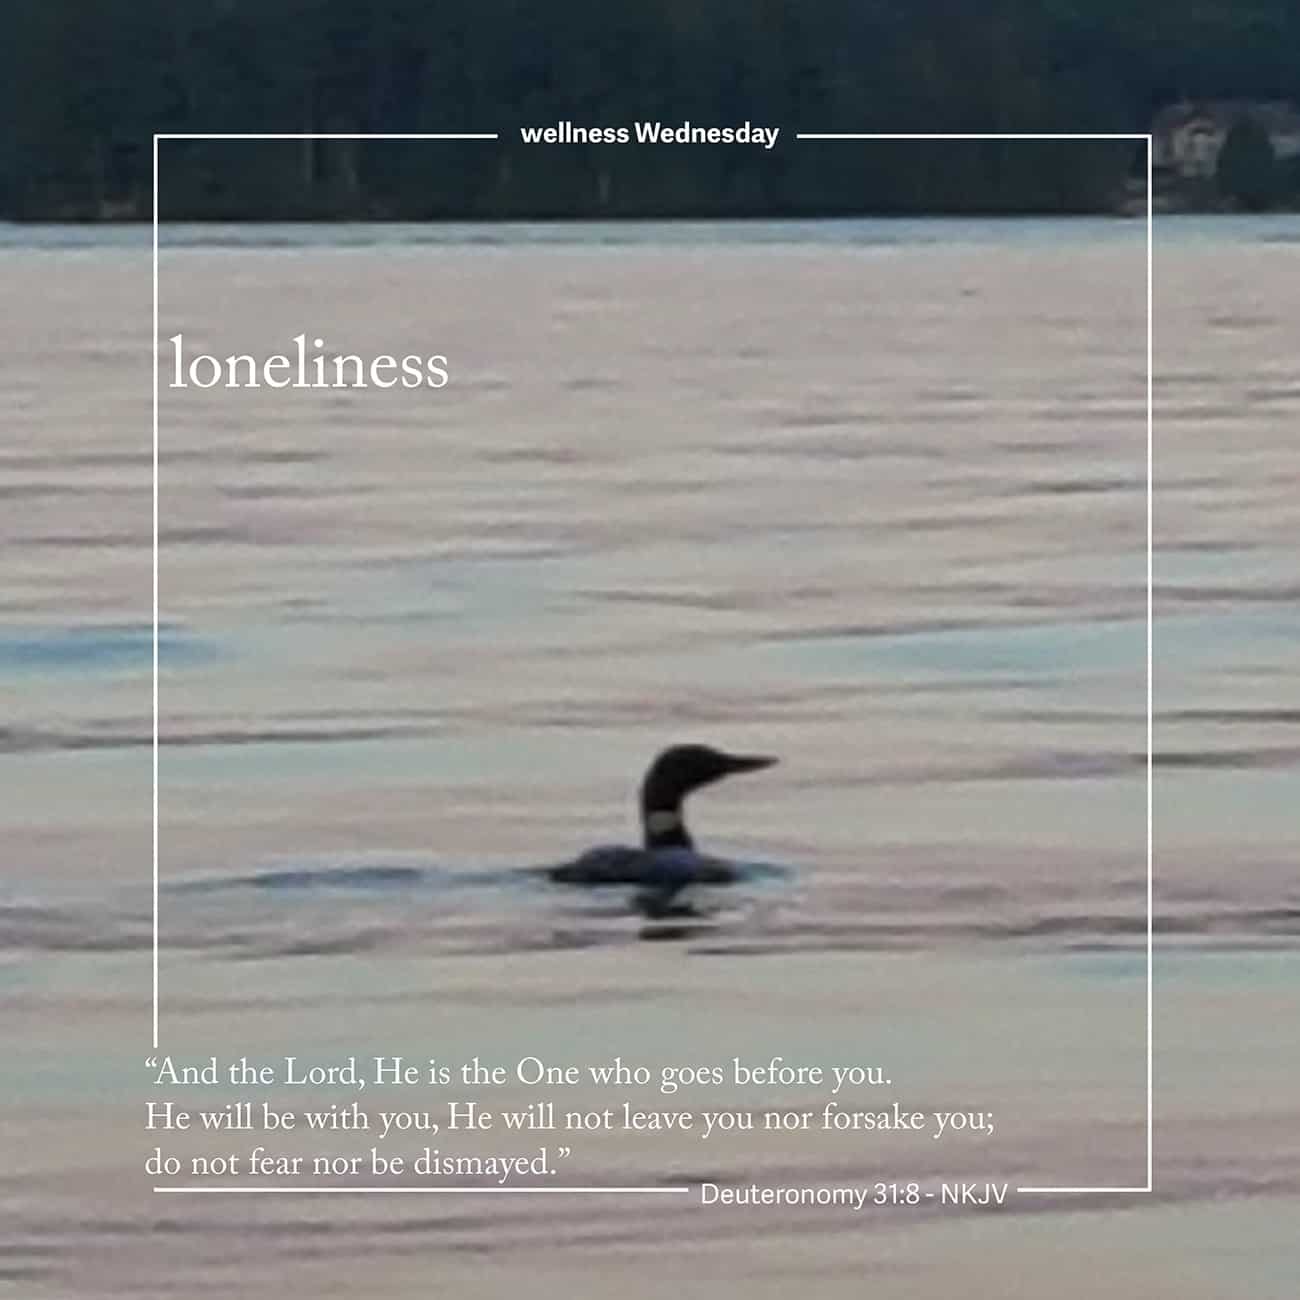 A single duck in the water